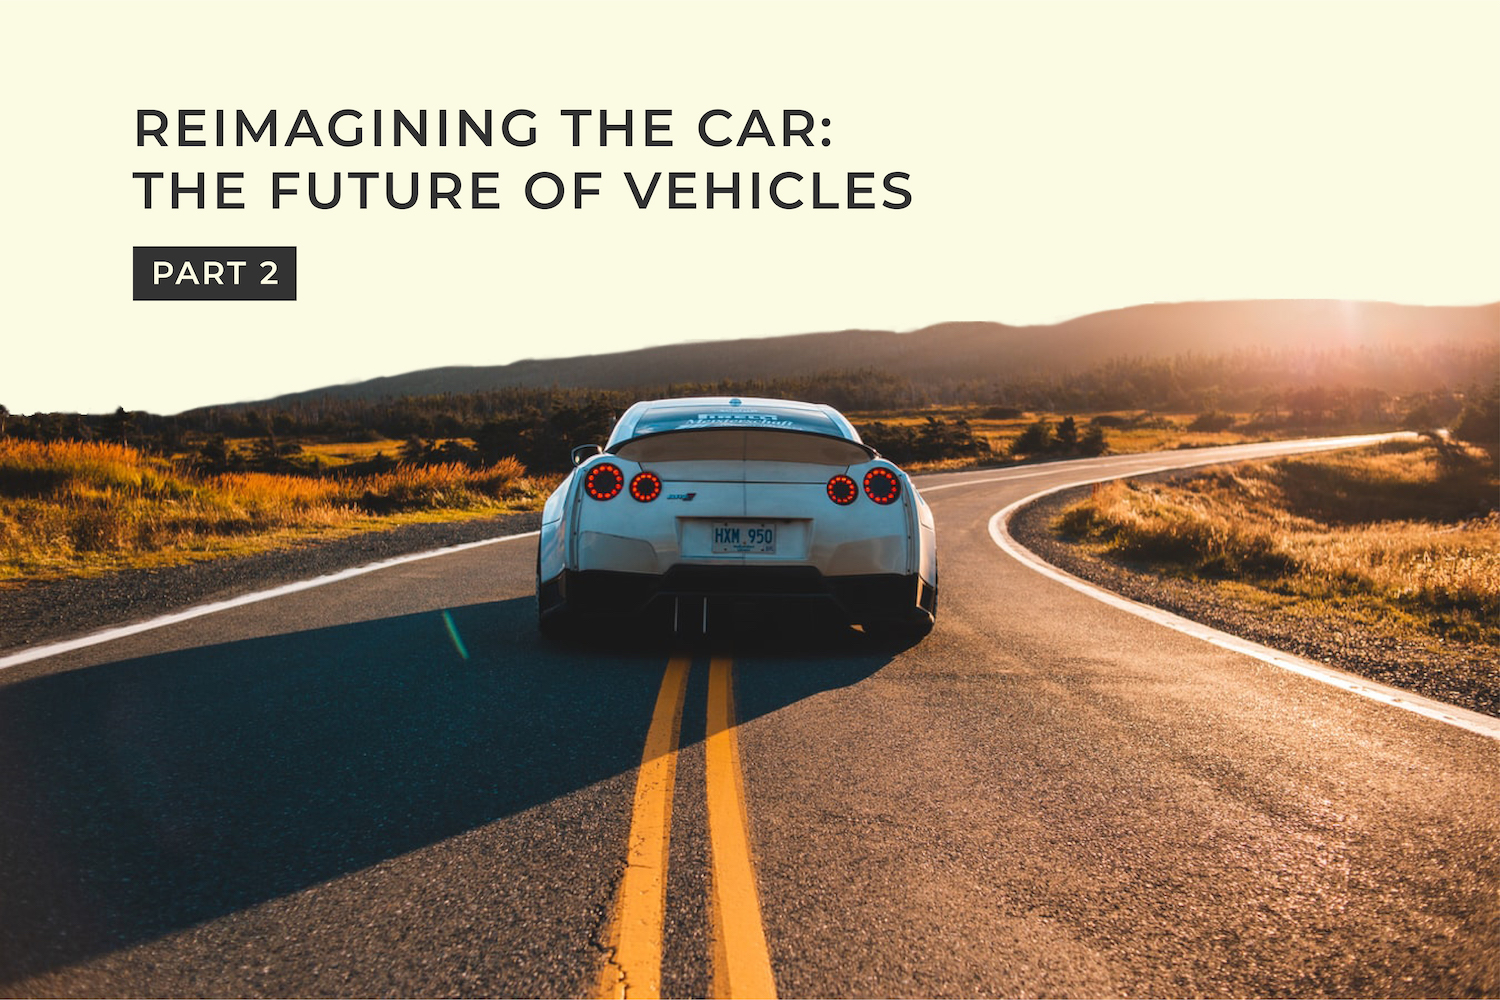 New vehicle technology has fully integrated with cars and trucks to reimagine the possibilities of the future and how they fit in our lives.